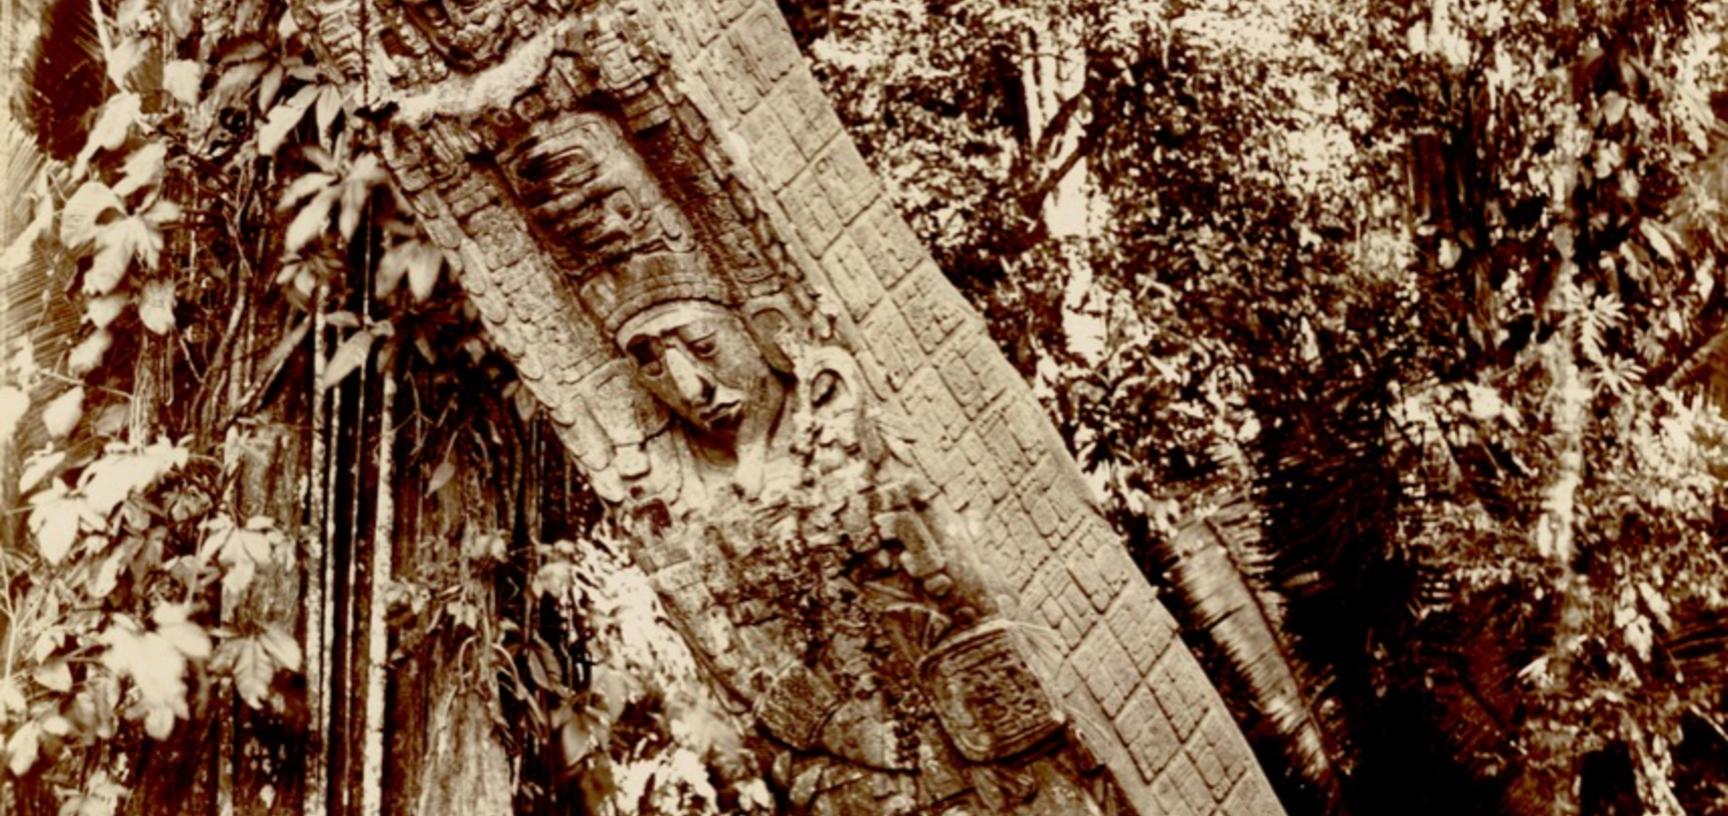 The ruins at Quirigua have been photographed many times since Alfred Maudslay’s pioneering work in the late nineteenth century, notably by several American archaeological expeditions which took place during the course of the last century, as well as by a 